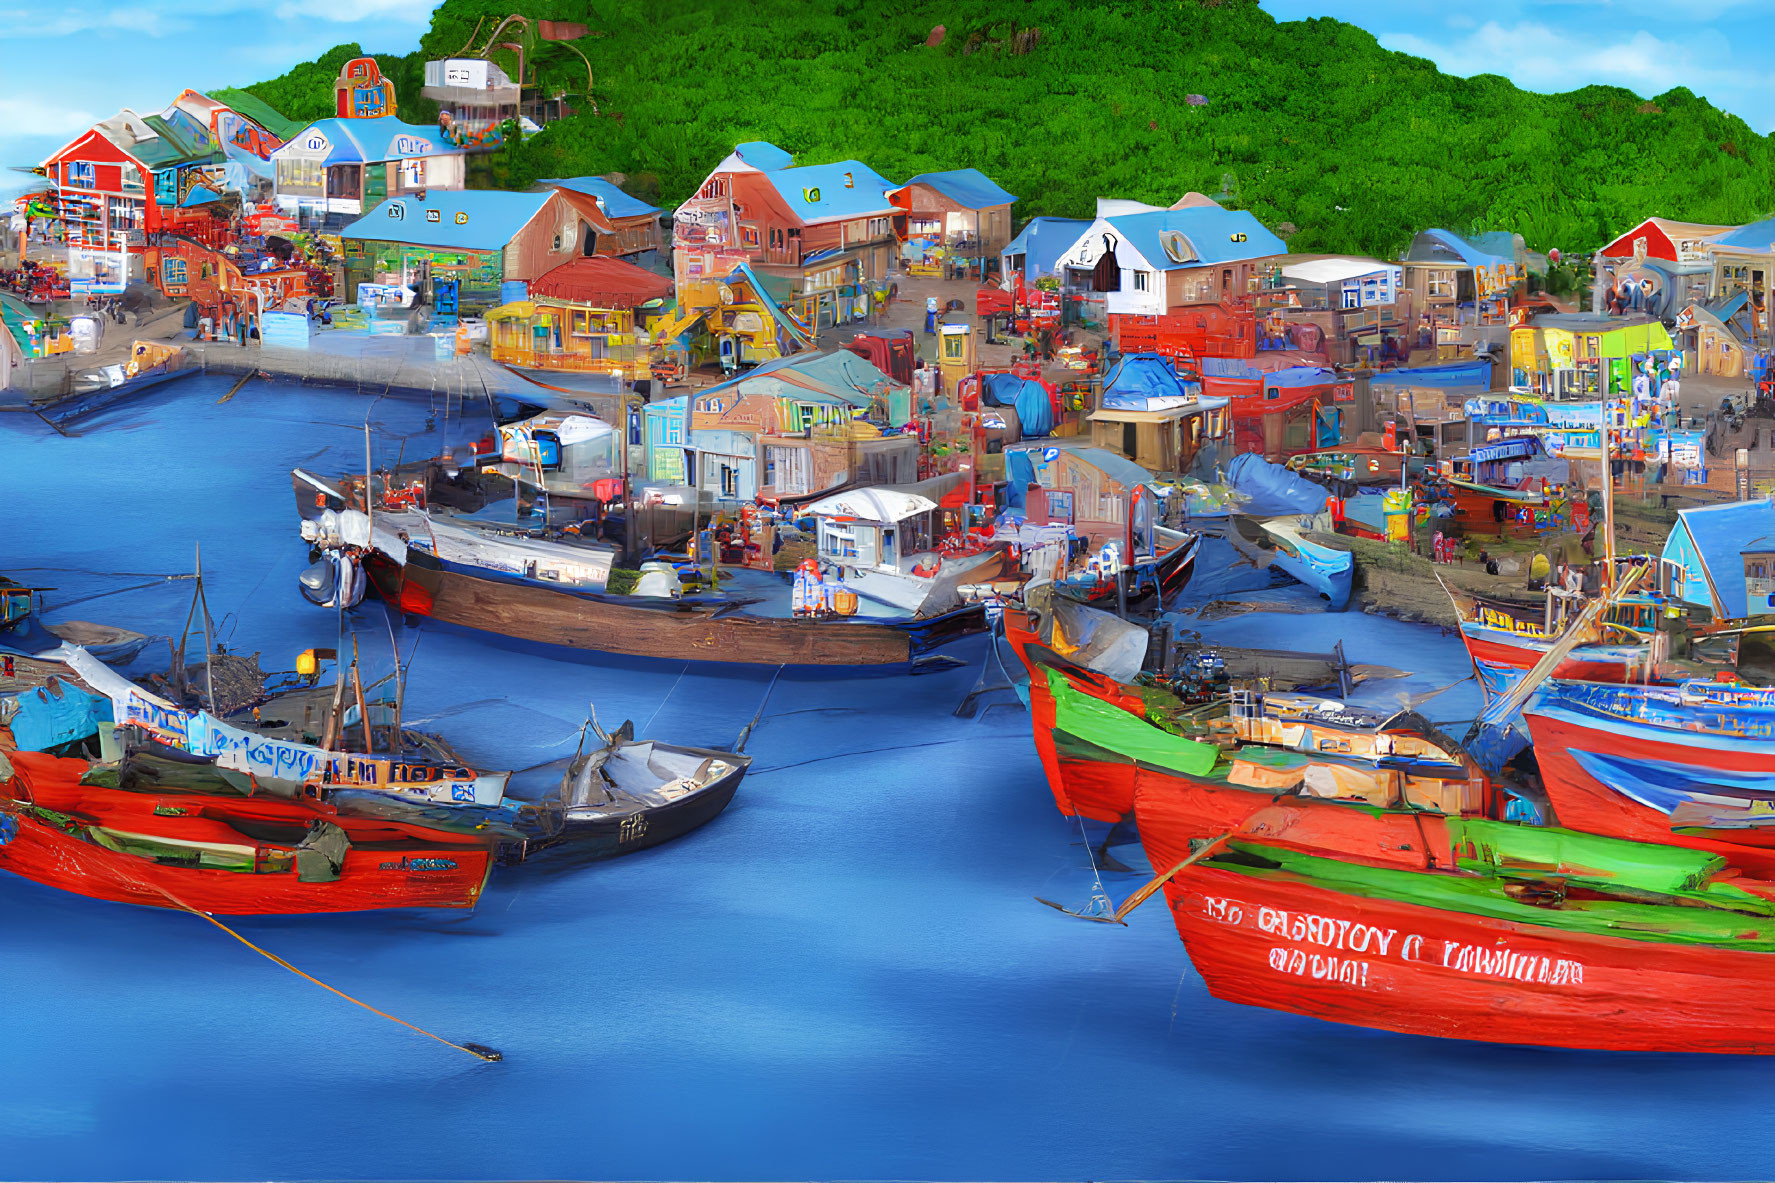 Picturesque Waterfront Village with Colorful Boats and Houses on Calm Blue Bay